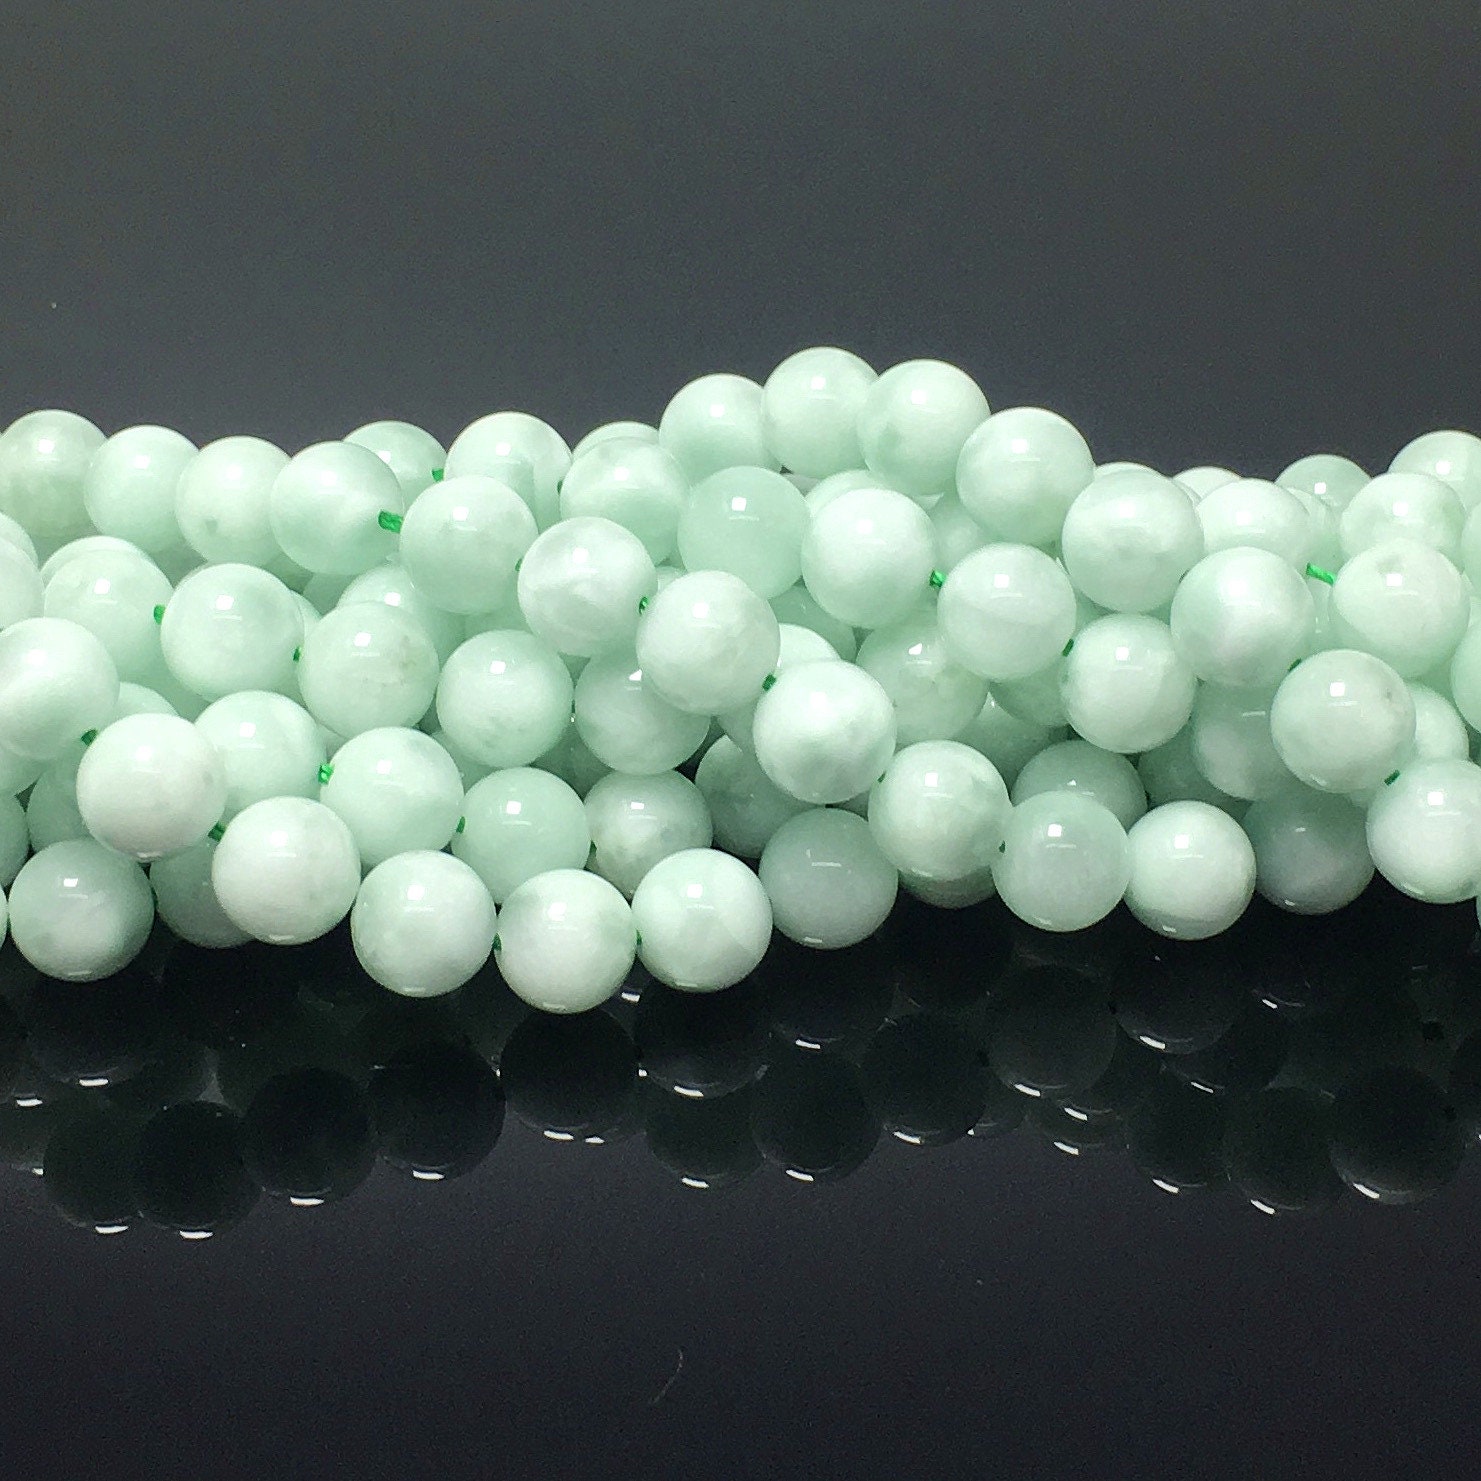 8mm Natural Green Angelite Beads Gemstone Spacer Round Beads for Handcraft Bracelet Necklace DIY Jewelry Making Design 15 inch Long Strands